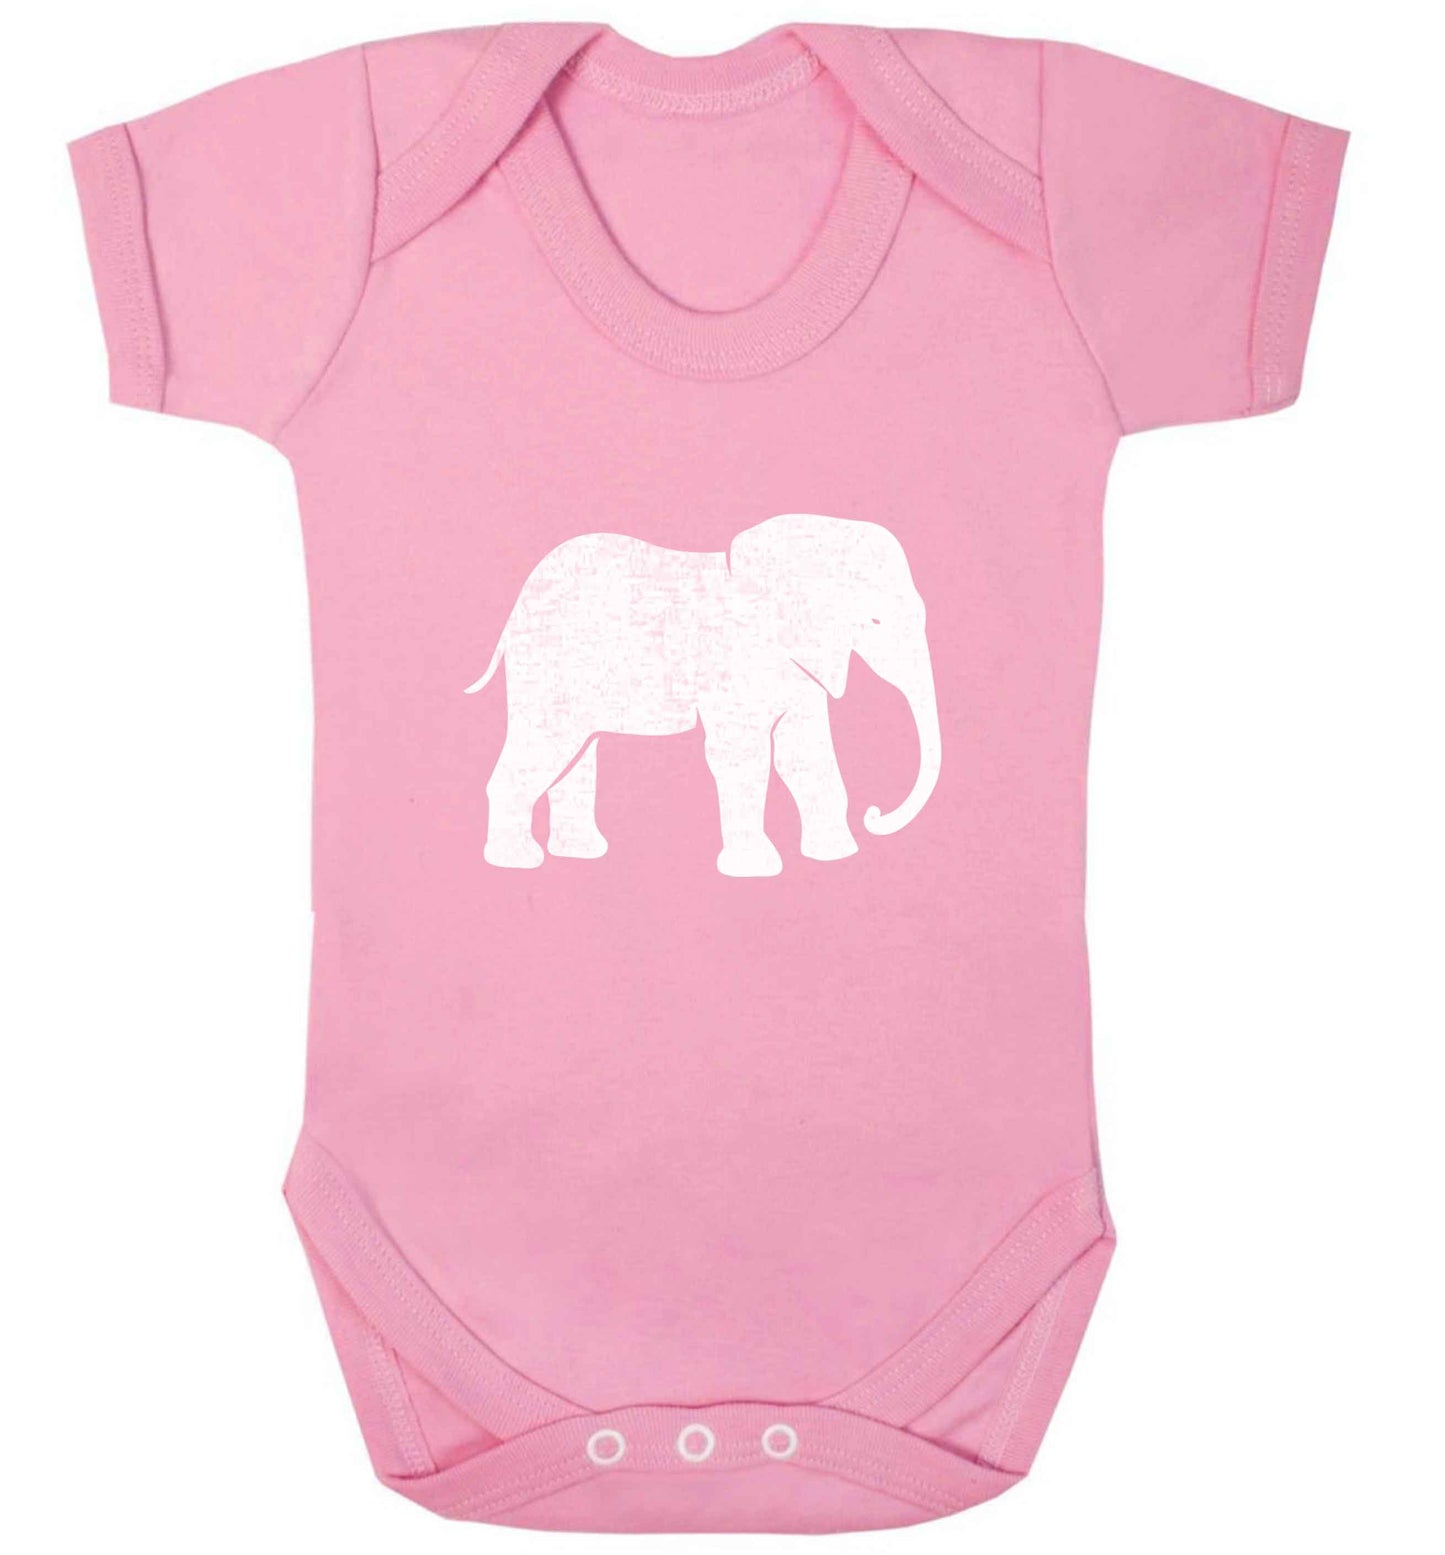 Pink elephant baby vest pale pink 18-24 months